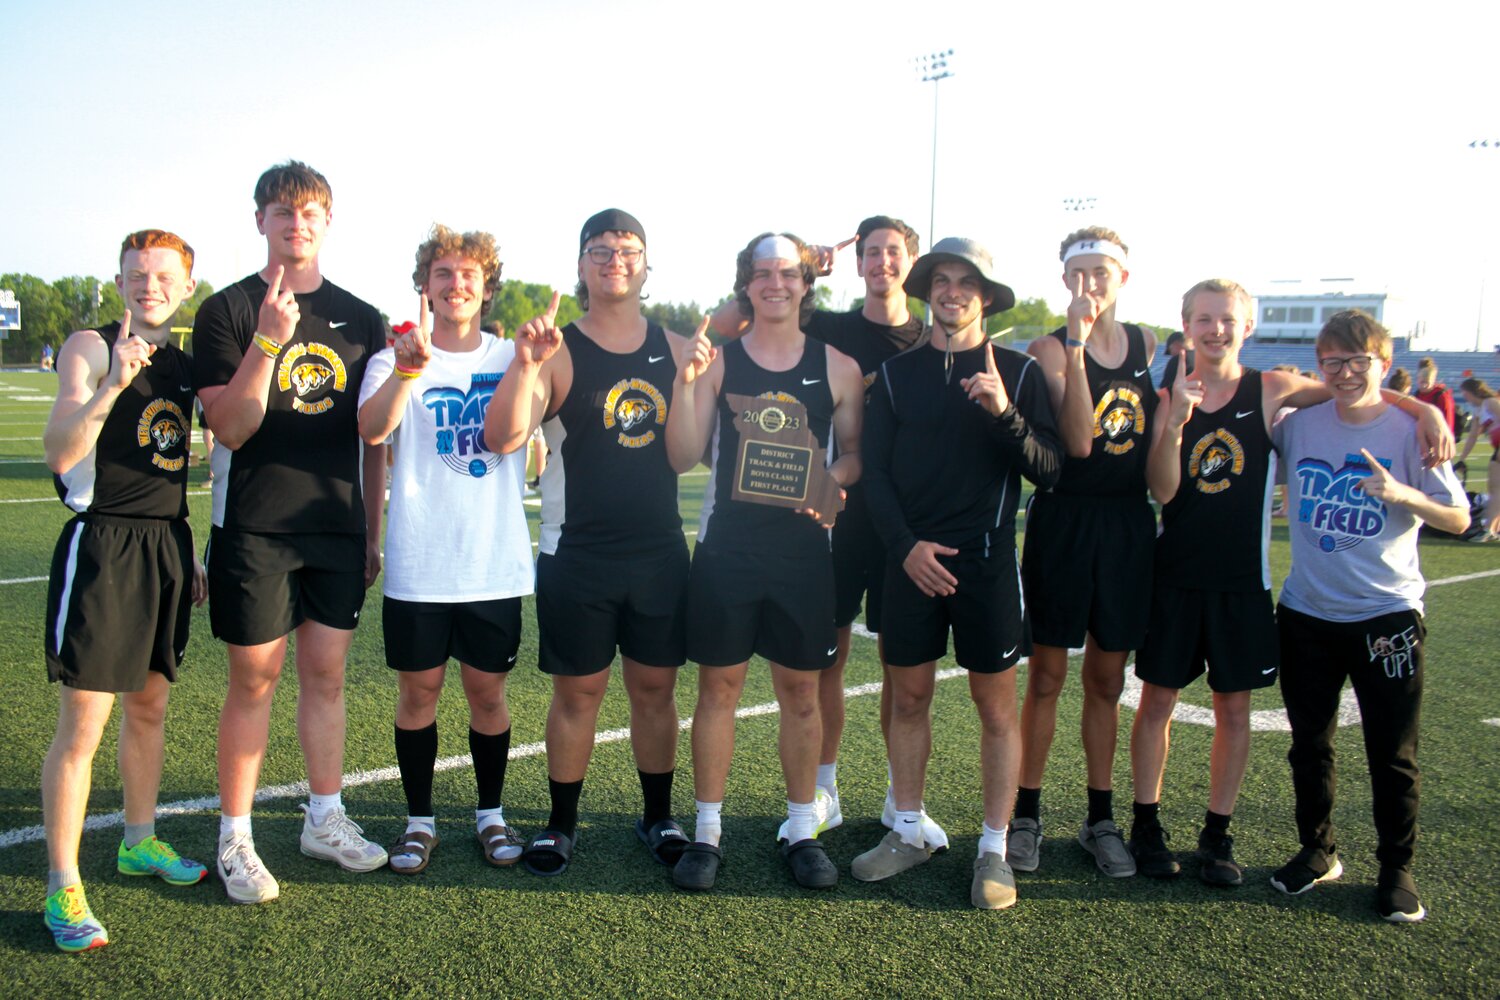 The Wellsville-Middletown boys track team poses with its district championship trophy after winning the Class 1, District 2 championship meet on May 6 at South Callaway High School. Pictured, from left, are Hunter Bickell, Logan Pursifull, Lucas Moore, Kadyn Emily, Dylan Alsop, Cooper Henderson, Jacob Mandrell, Gage Marshall, Jonah Slovensky and Zackery Vogel.